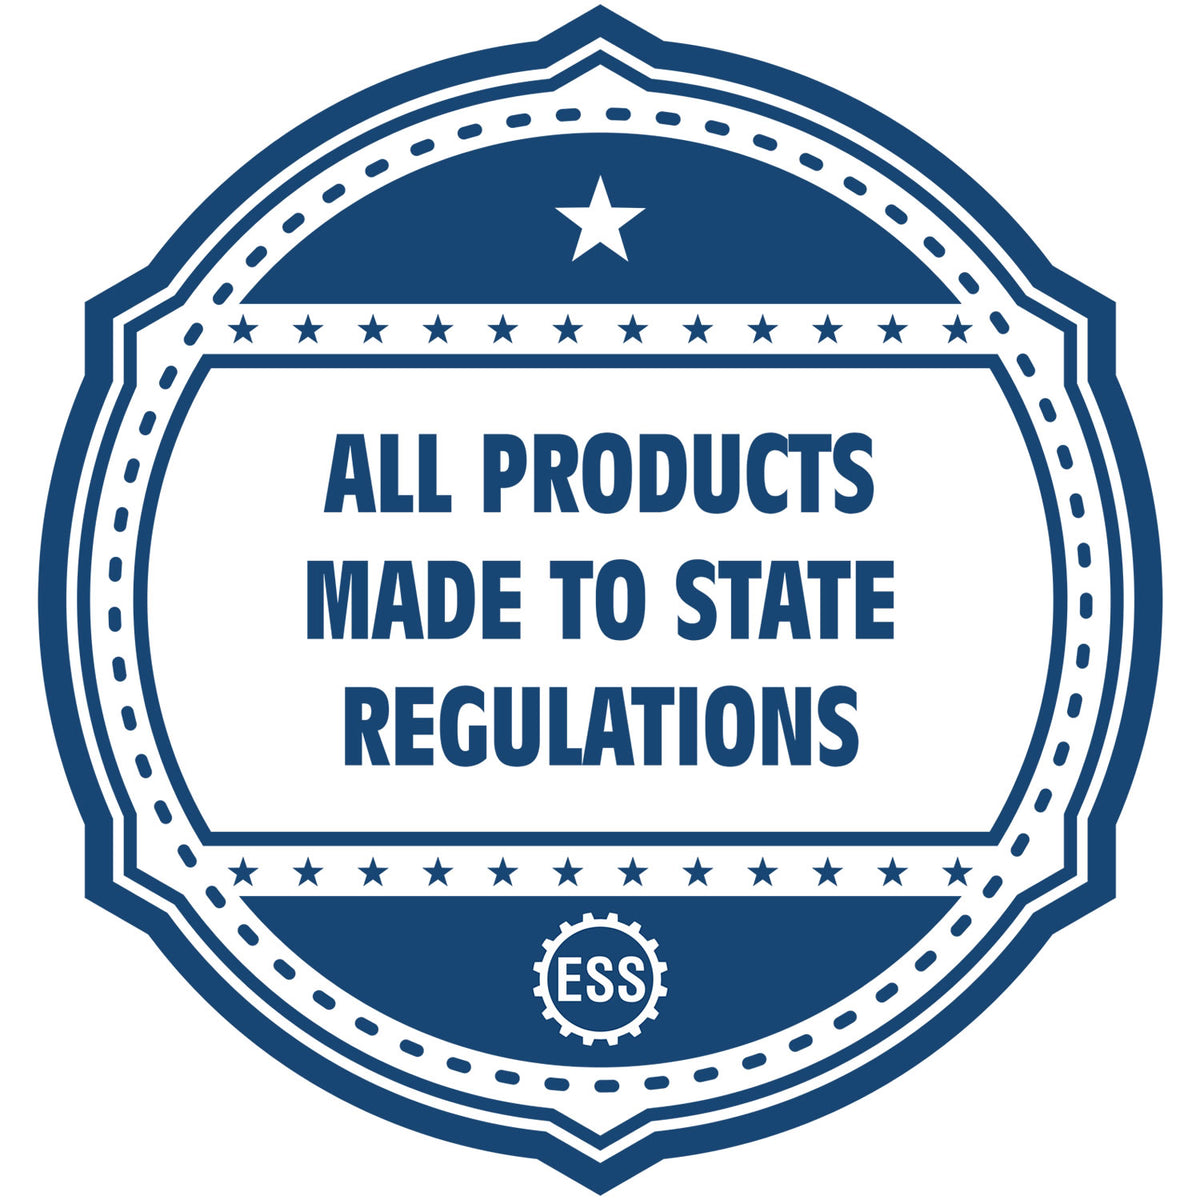 An icon or badge element for the Mississippi Landscape Architectural Seal Stamp showing that this product is made in compliance with state regulations.